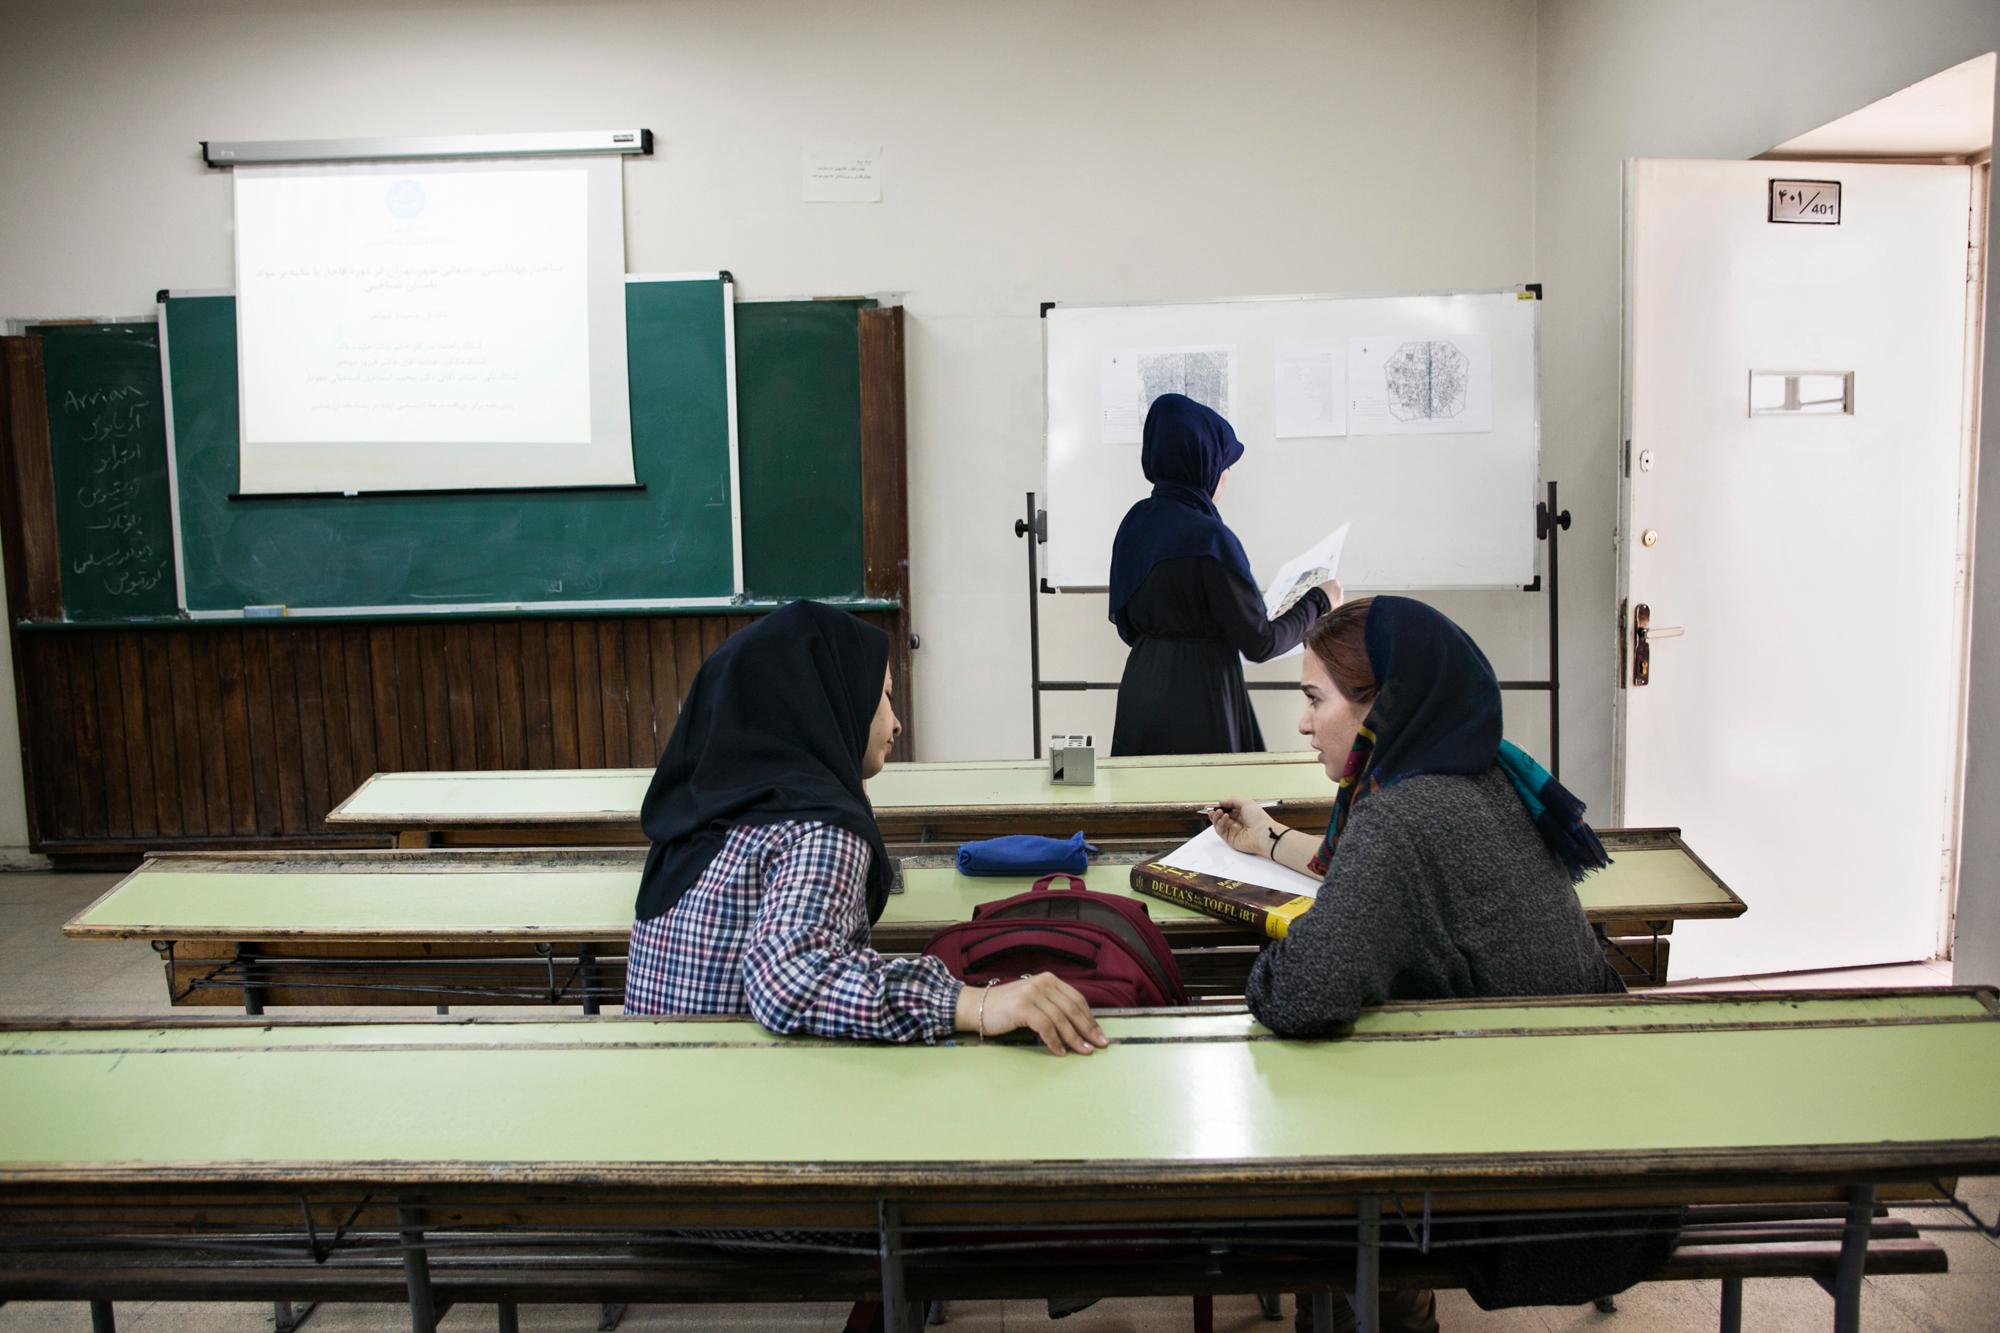 Tehran : the faces of women's empowerment - At the university, women represent about 65% of the...